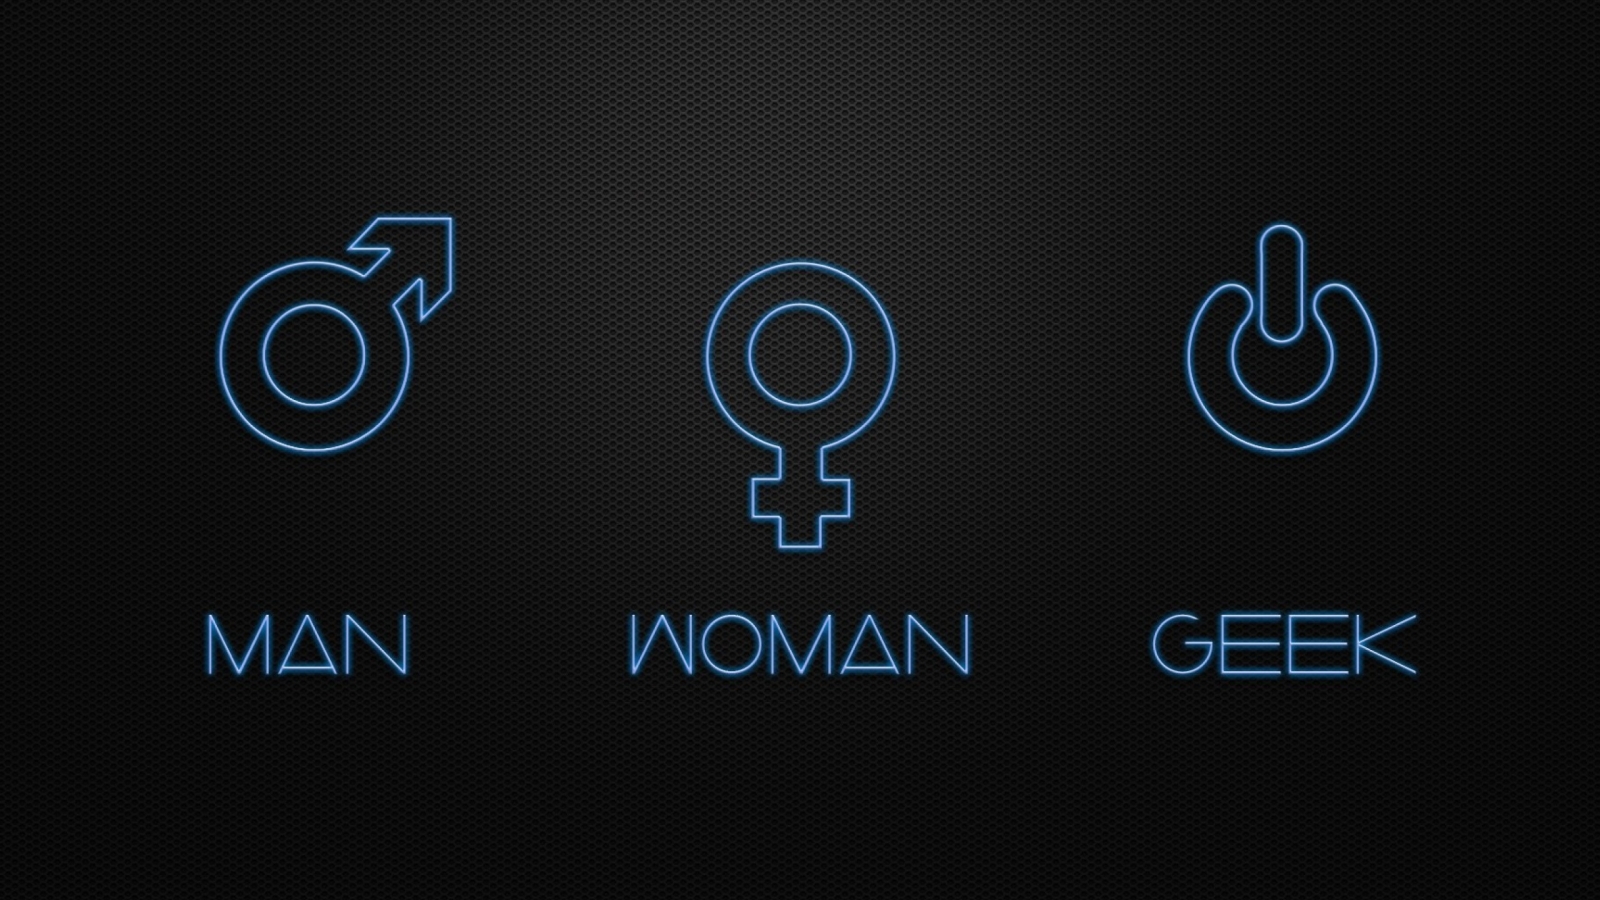 Man Woman and Geek for 1600 x 900 HDTV resolution